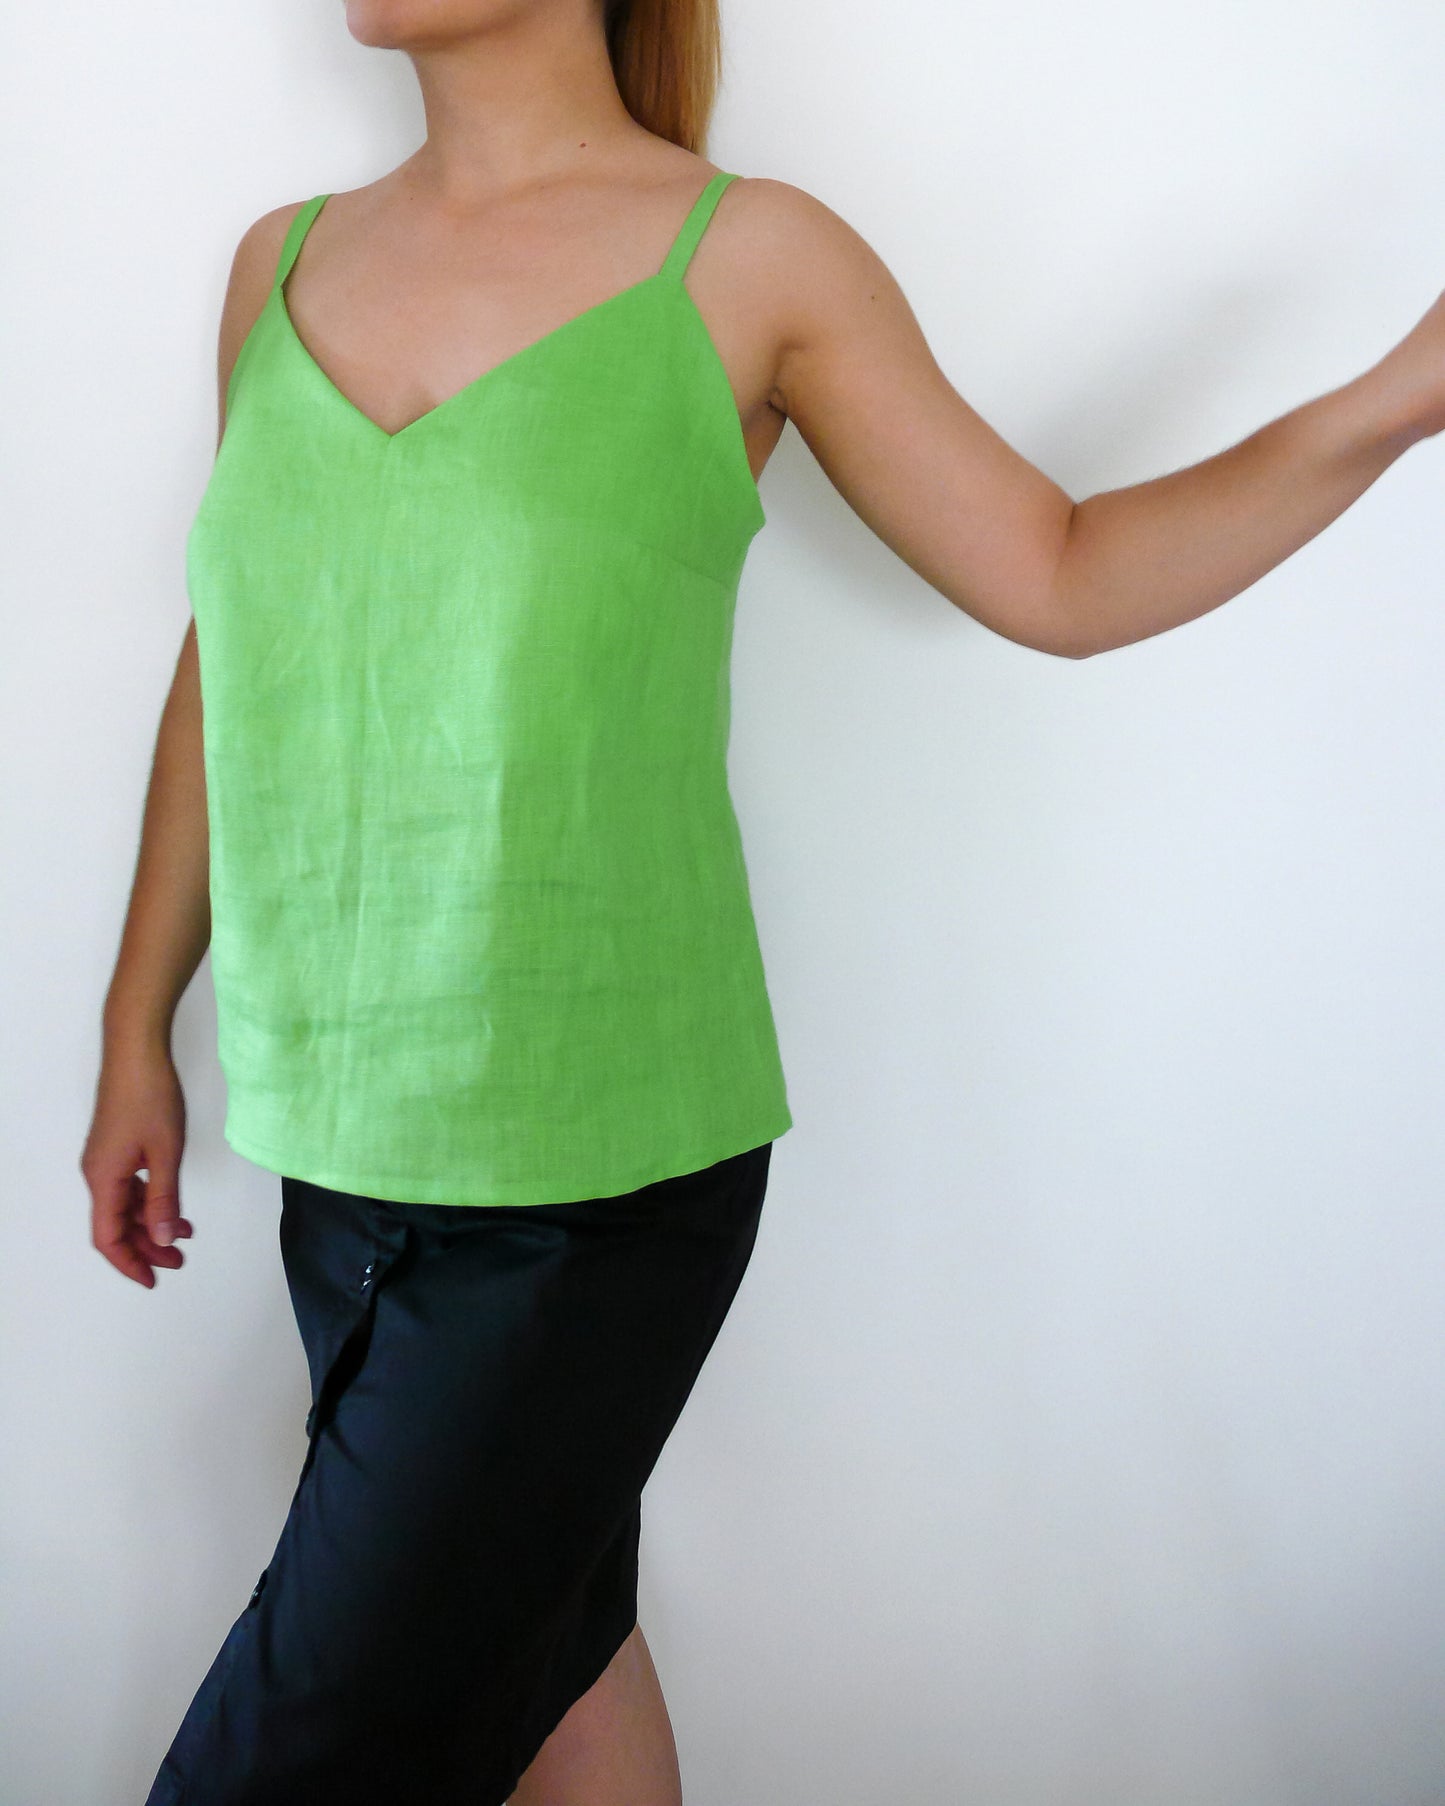 Camisole Top and Dress Sewing Pattern N.92